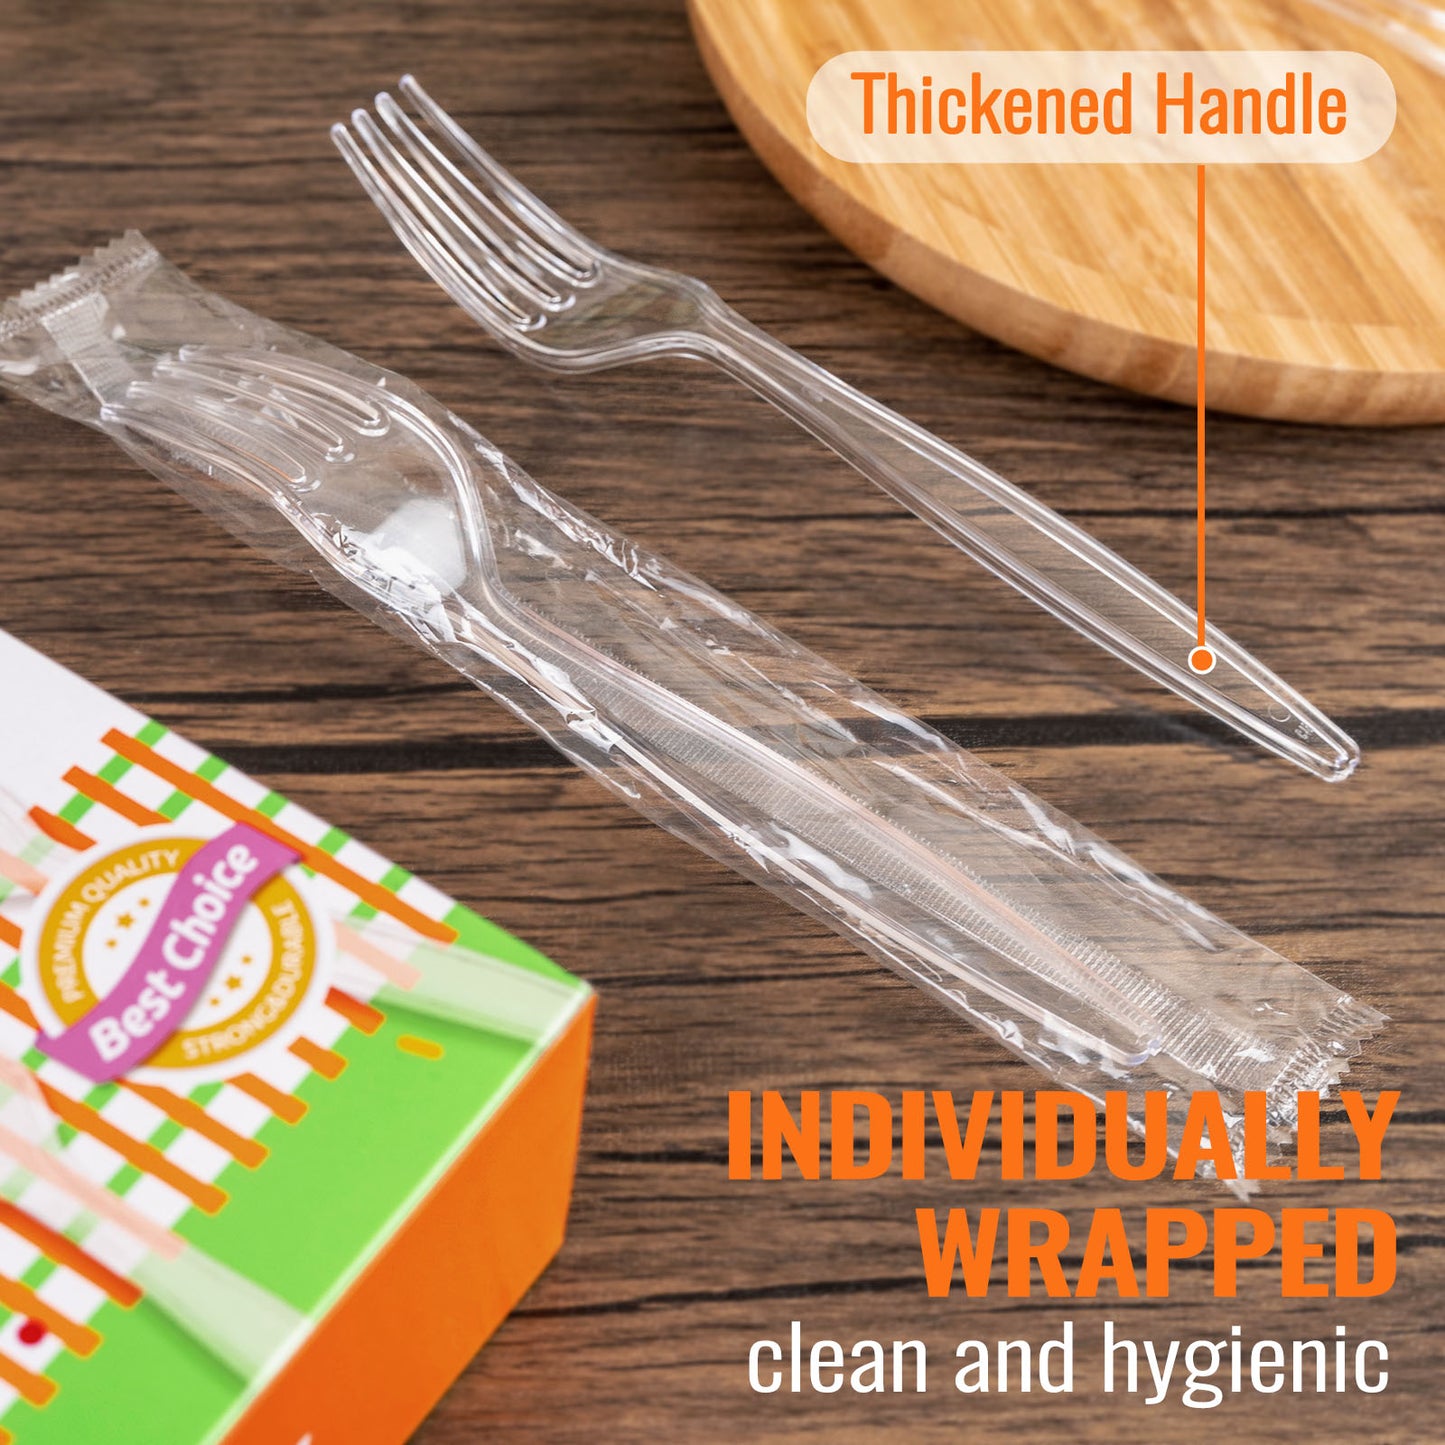 Individual Packing Heavyweight Plastic Forks Set (50 Pieces)